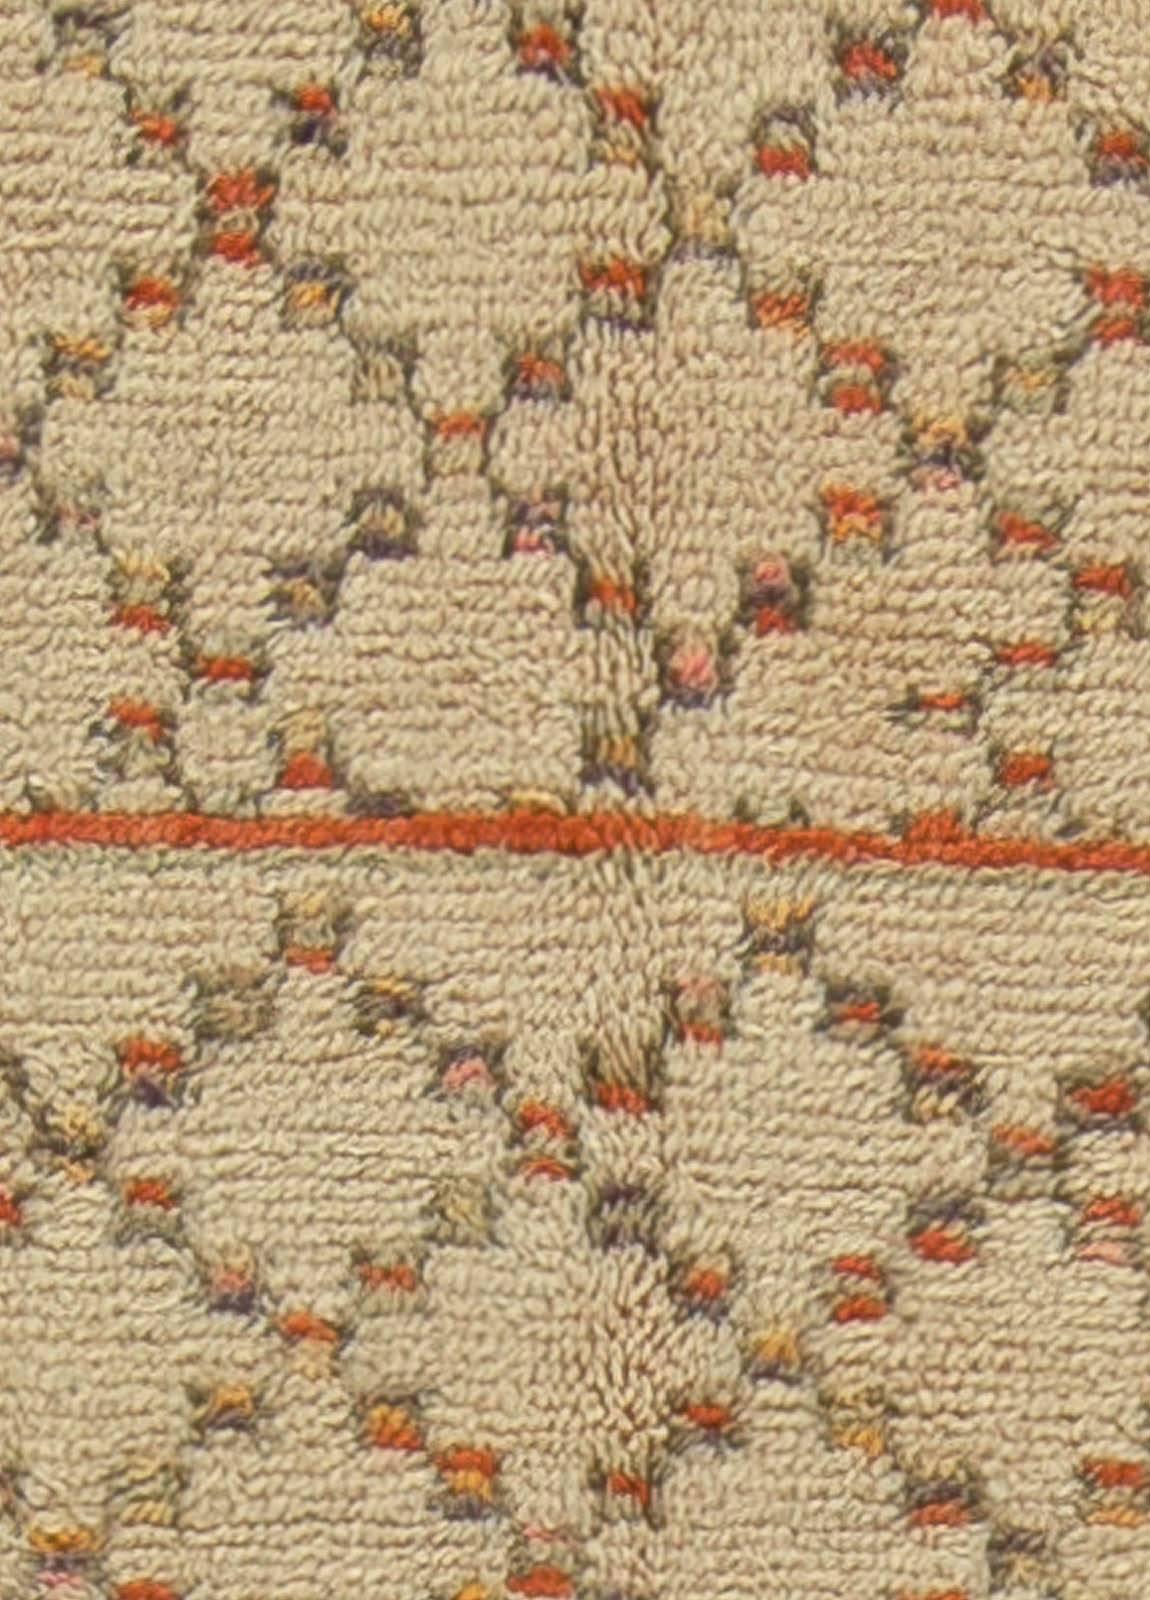 This circa 1940 vintage Moroccan rug features an all-over design of a multicolored lattice in shades of yellow, orange and blue against a field of neutral beige. Stark and Minimalist, the vintage carpet is an intriguing abstract statement.